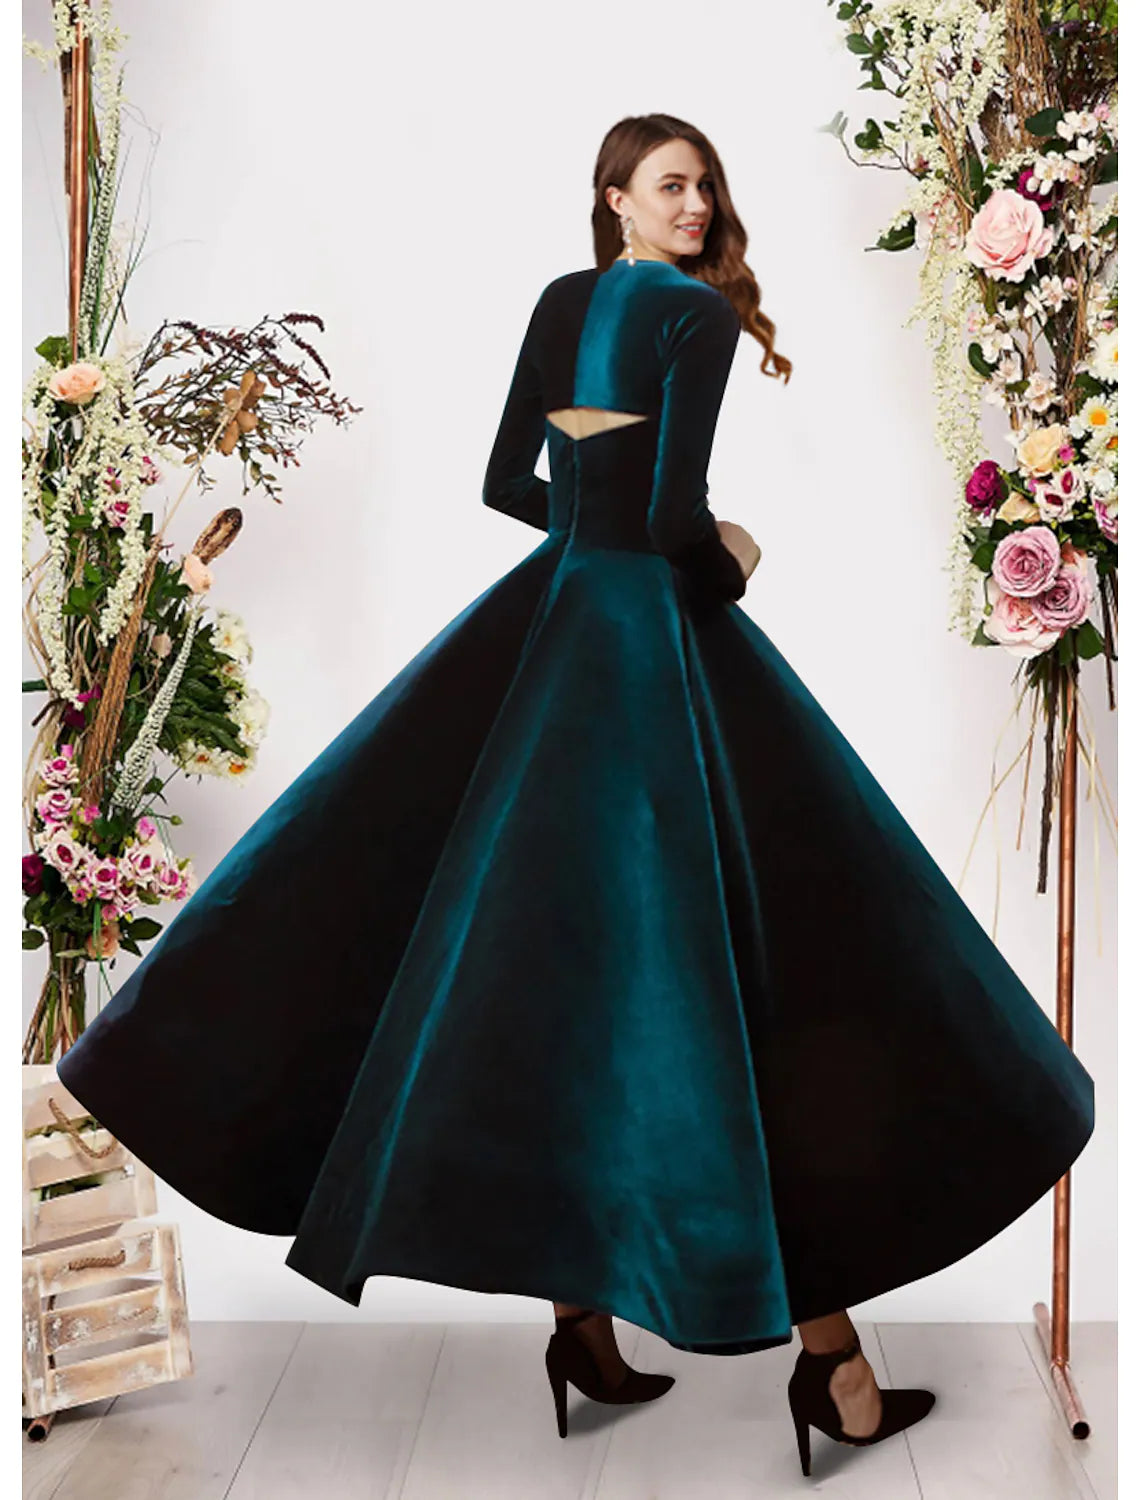 Ball Gown Evening Gown Vintage Dress Prom Ankle Length Long Sleeve Square Neck Velvet with Pure Color